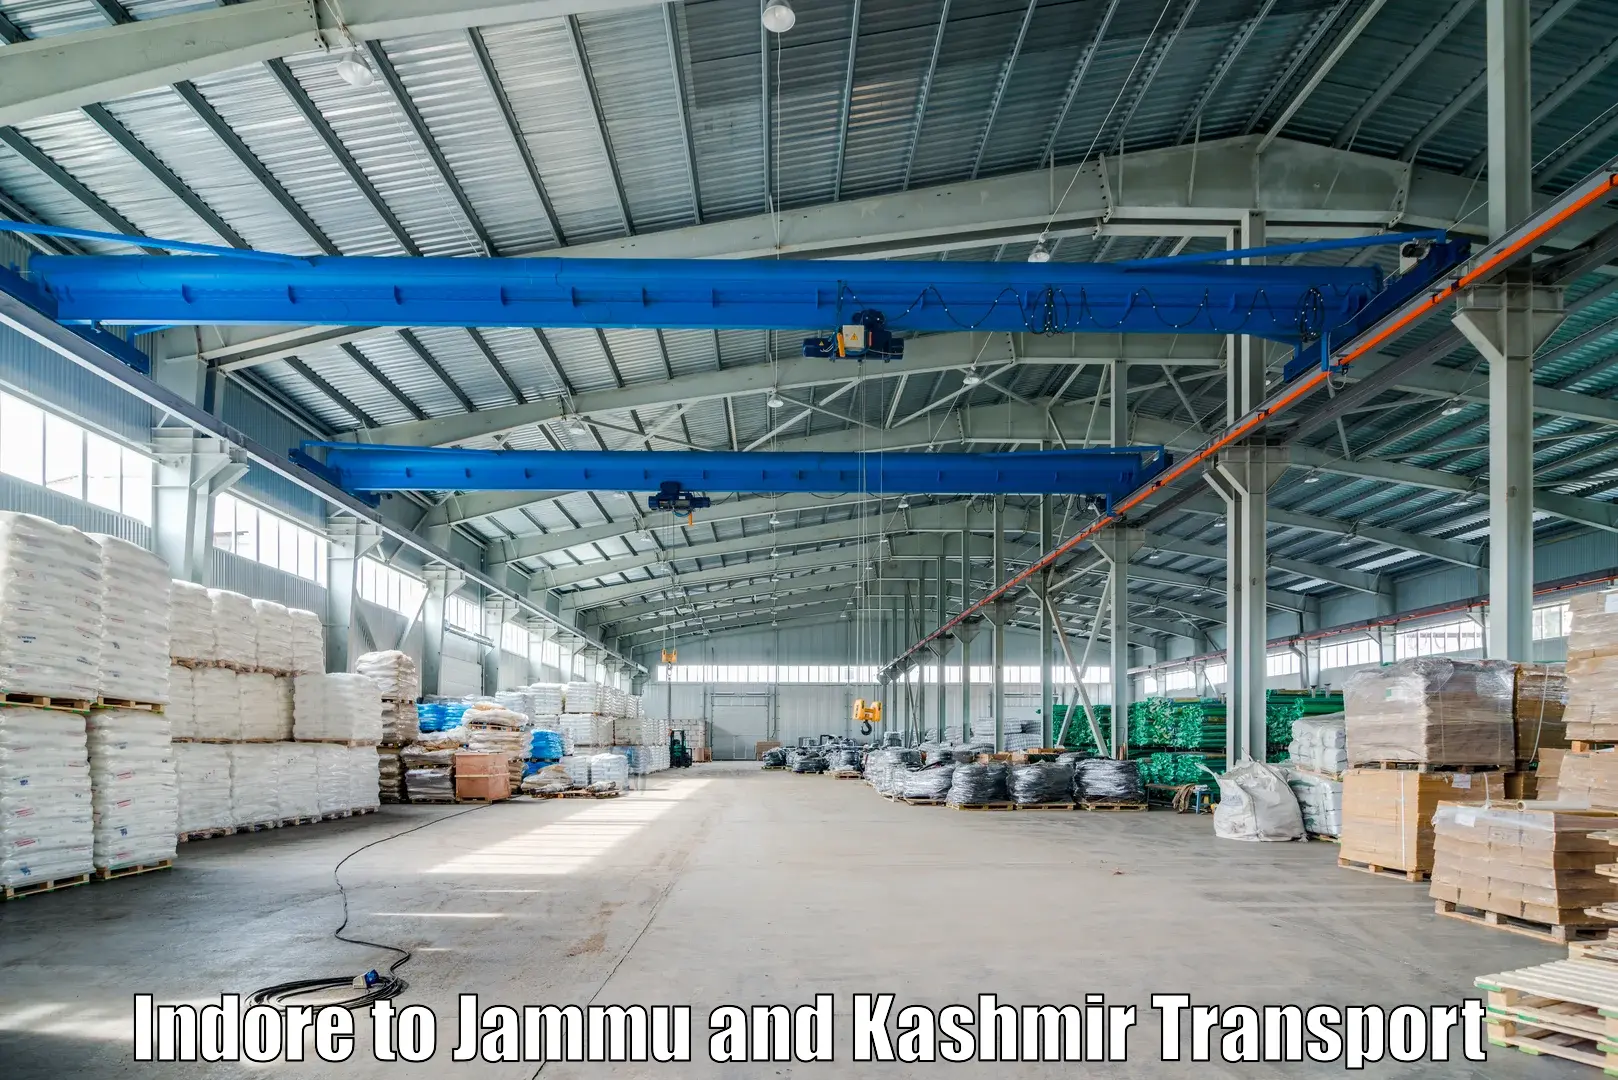 Transport shared services Indore to Jammu and Kashmir